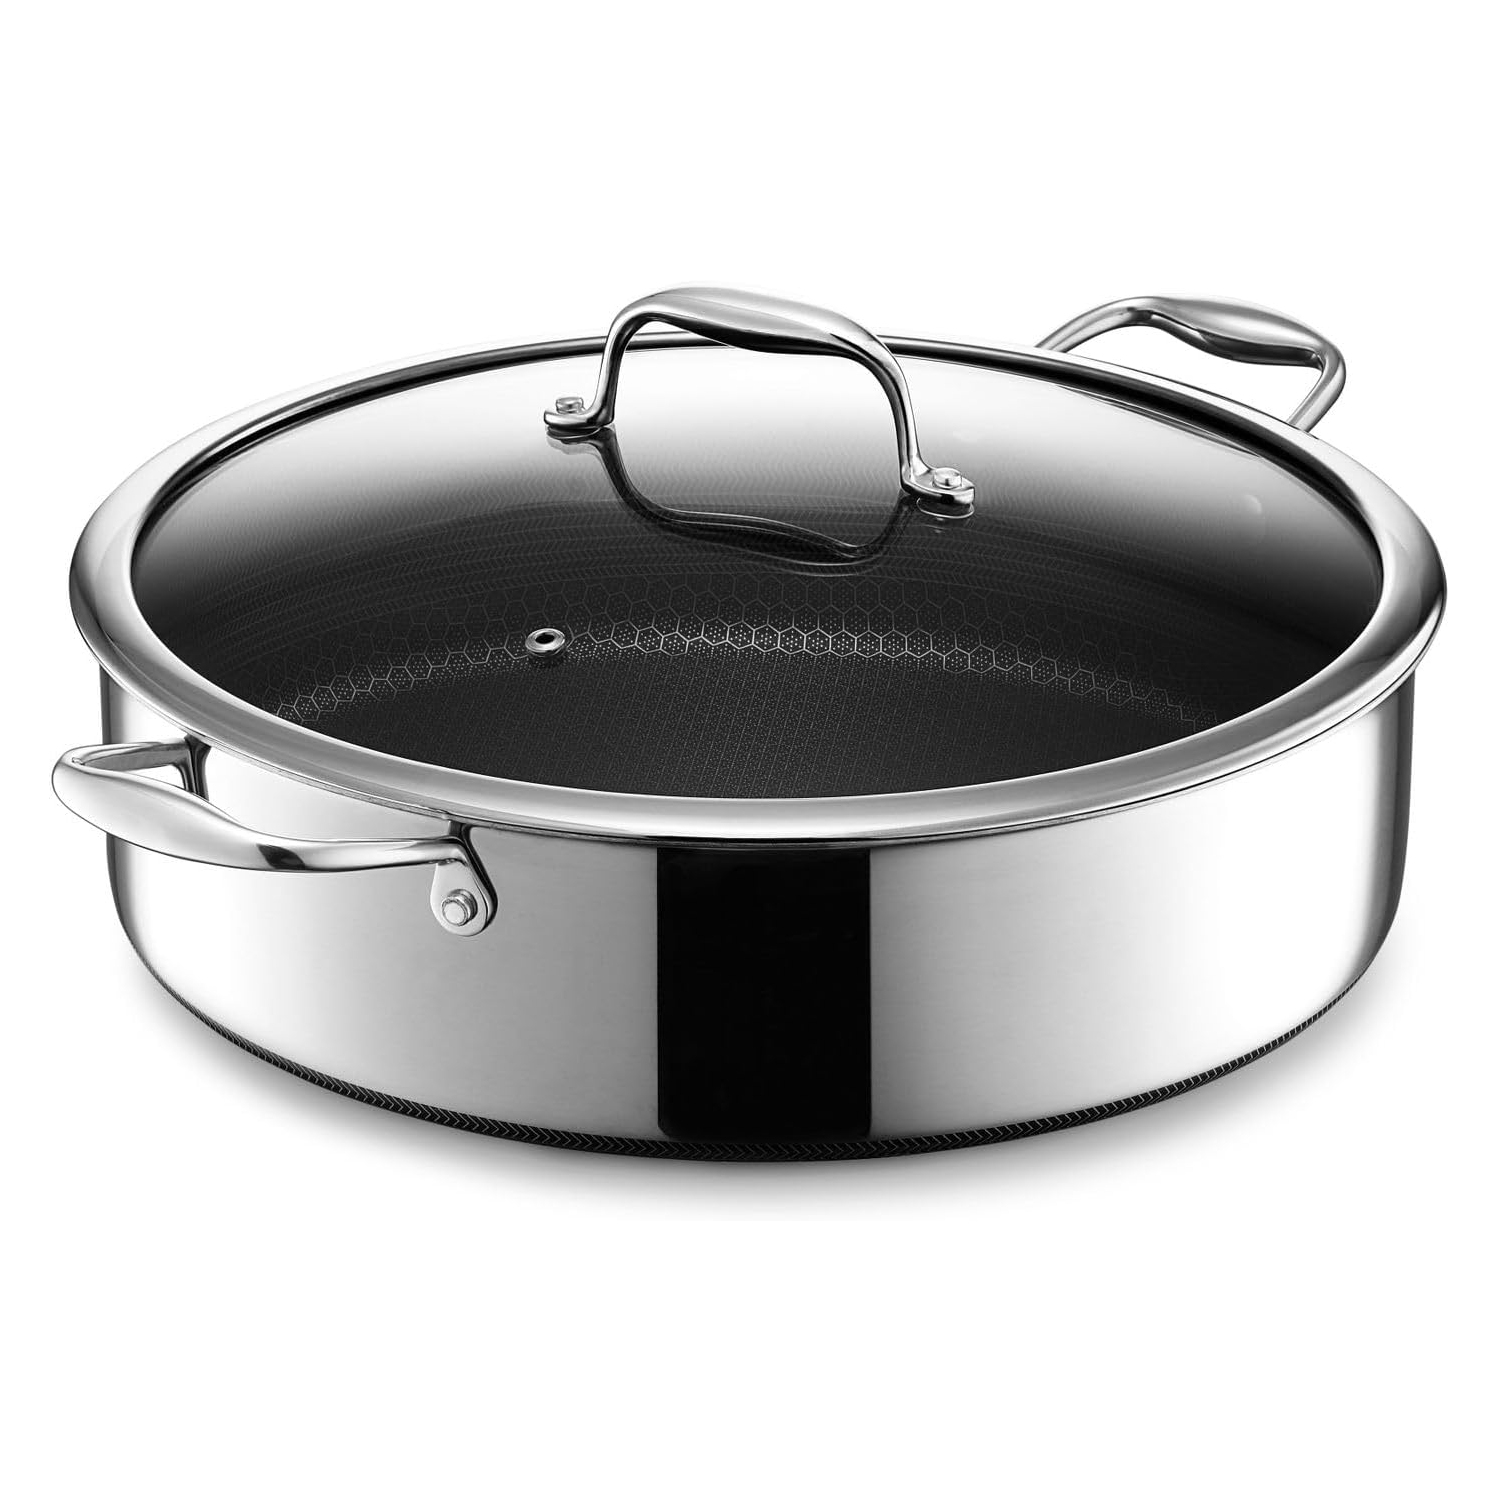 HexClad 7 Quart Hybrid Nonstick Saute Pan, Dishwasher and Oven Friendly, Compatible with All Cooktops